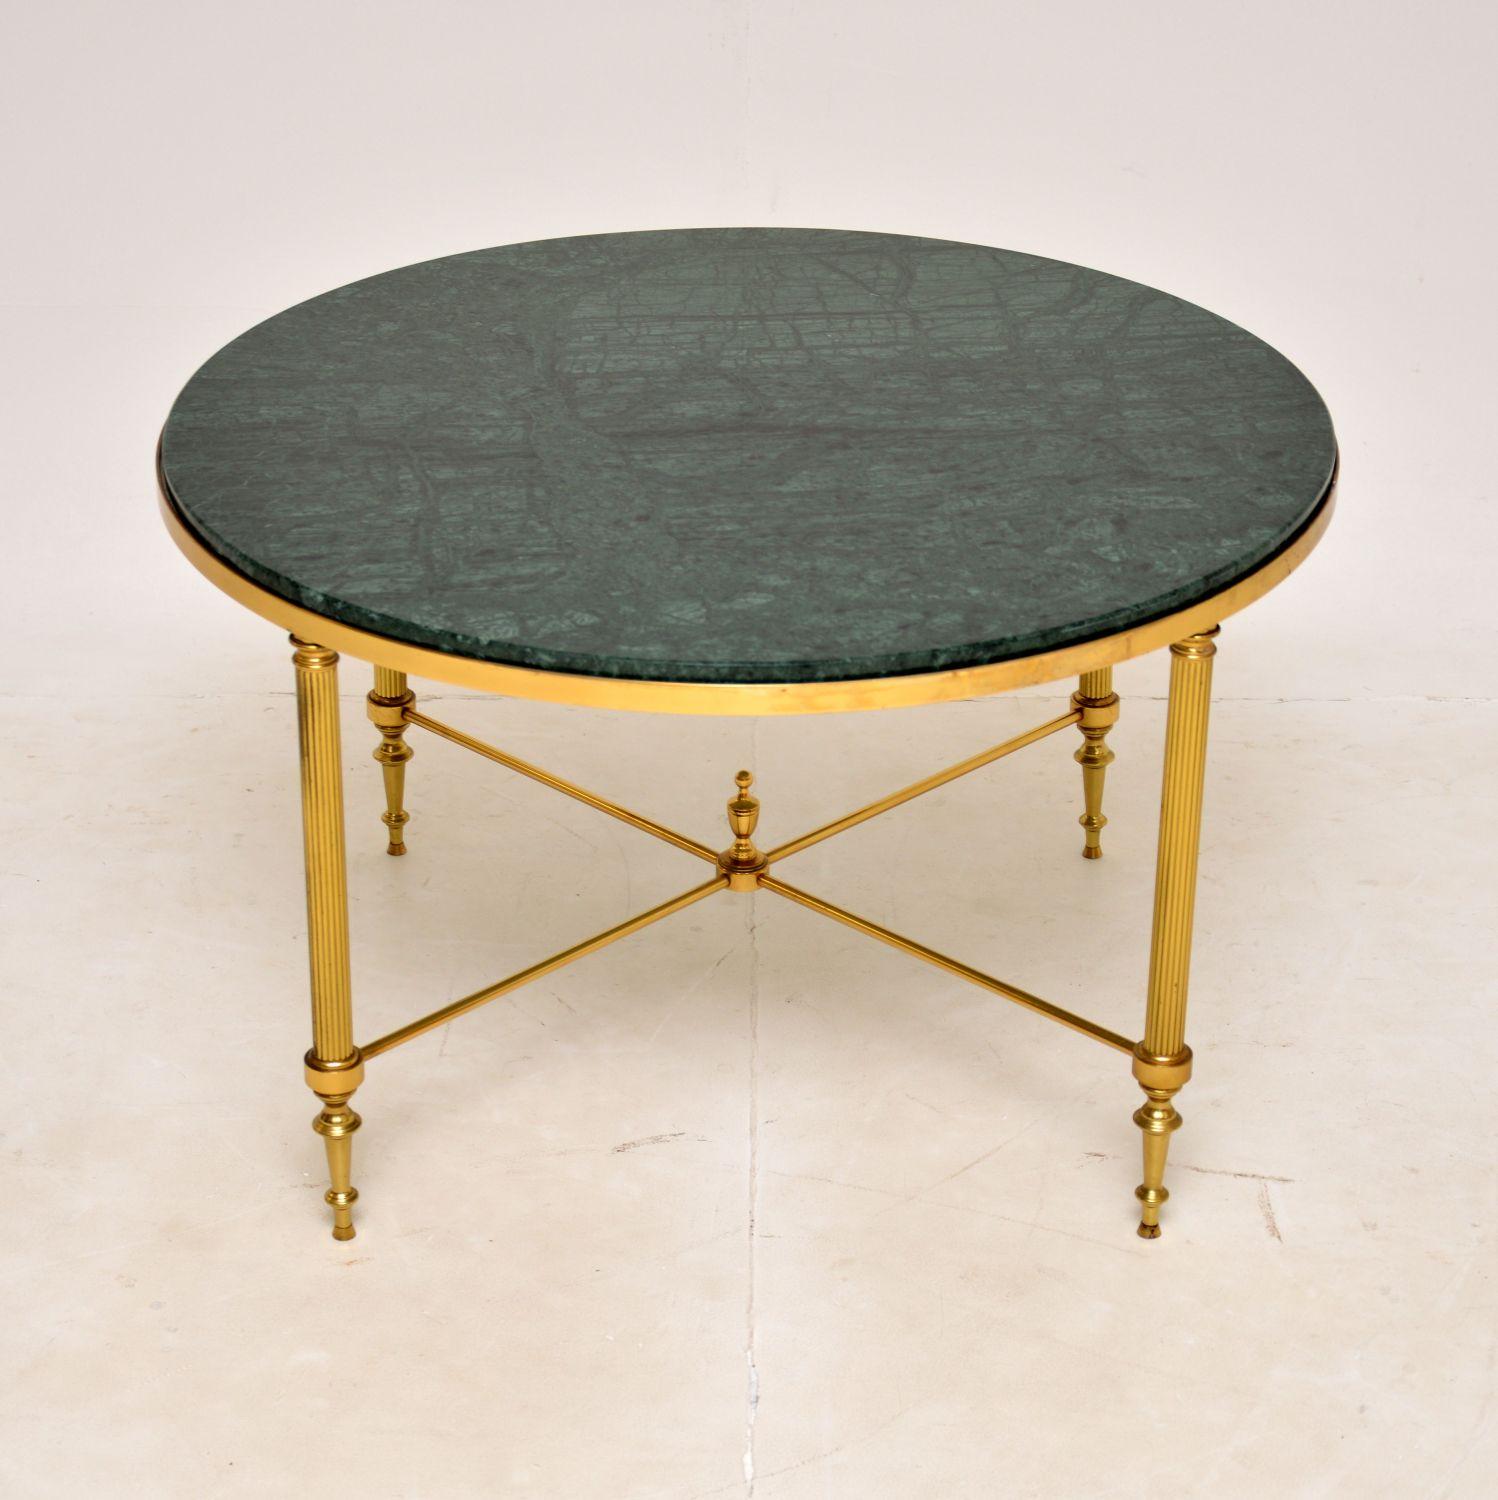 A stunning vintage circular coffee table in solid brass and marble. This was made in France, it dates from around the 1960-70’s.

It is of superb quality and has a gorgeous design. The frame is elegant yet sturdy, the inset green marble top